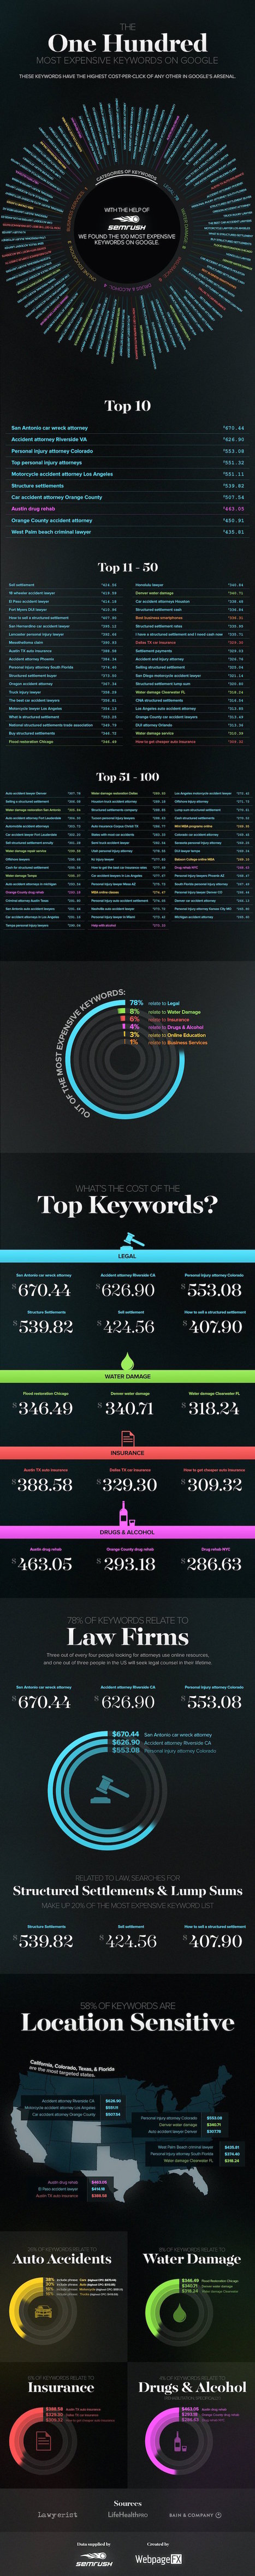 The 100 Most Expensive Keywords on Google #Infographic | World's Best Infographics | Scoop.it